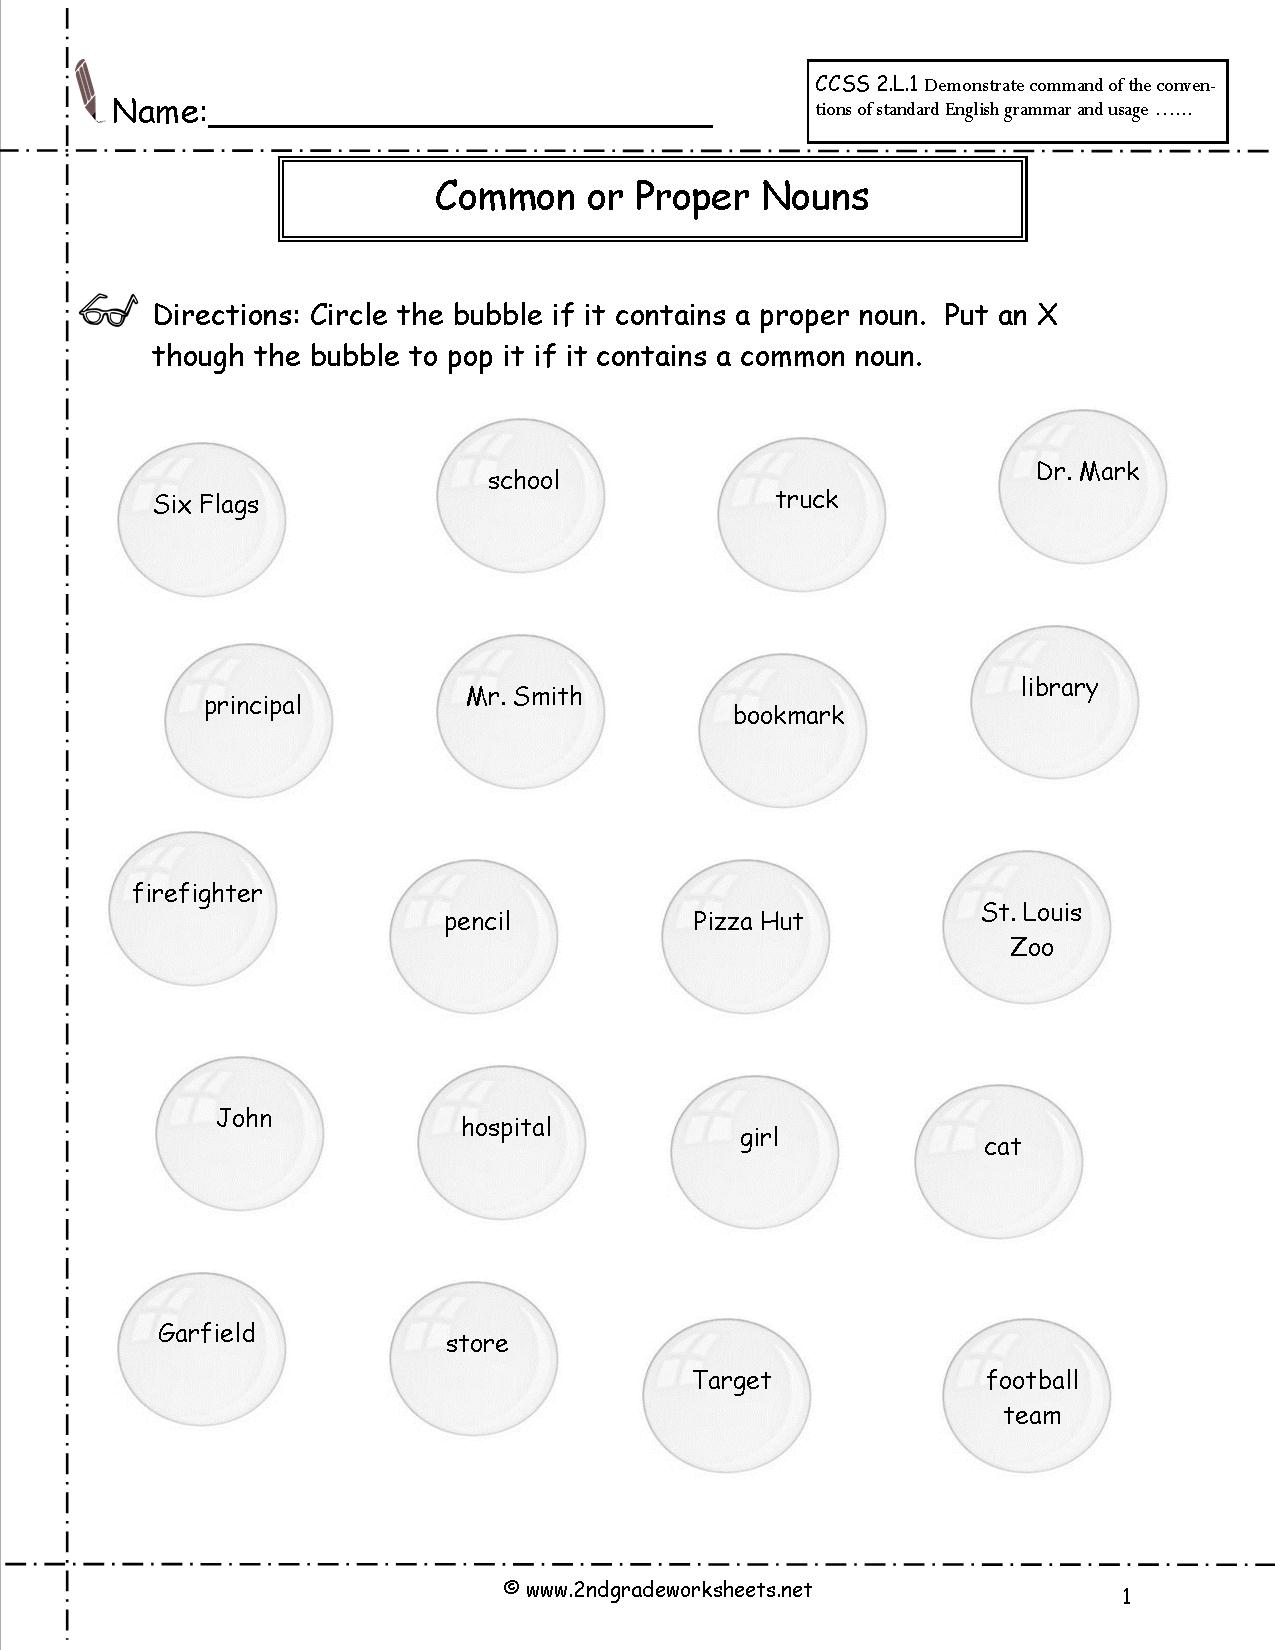 16-best-images-of-common-nouns-worksheets-grade-6-common-and-proper-noun-worksheet-first-grade